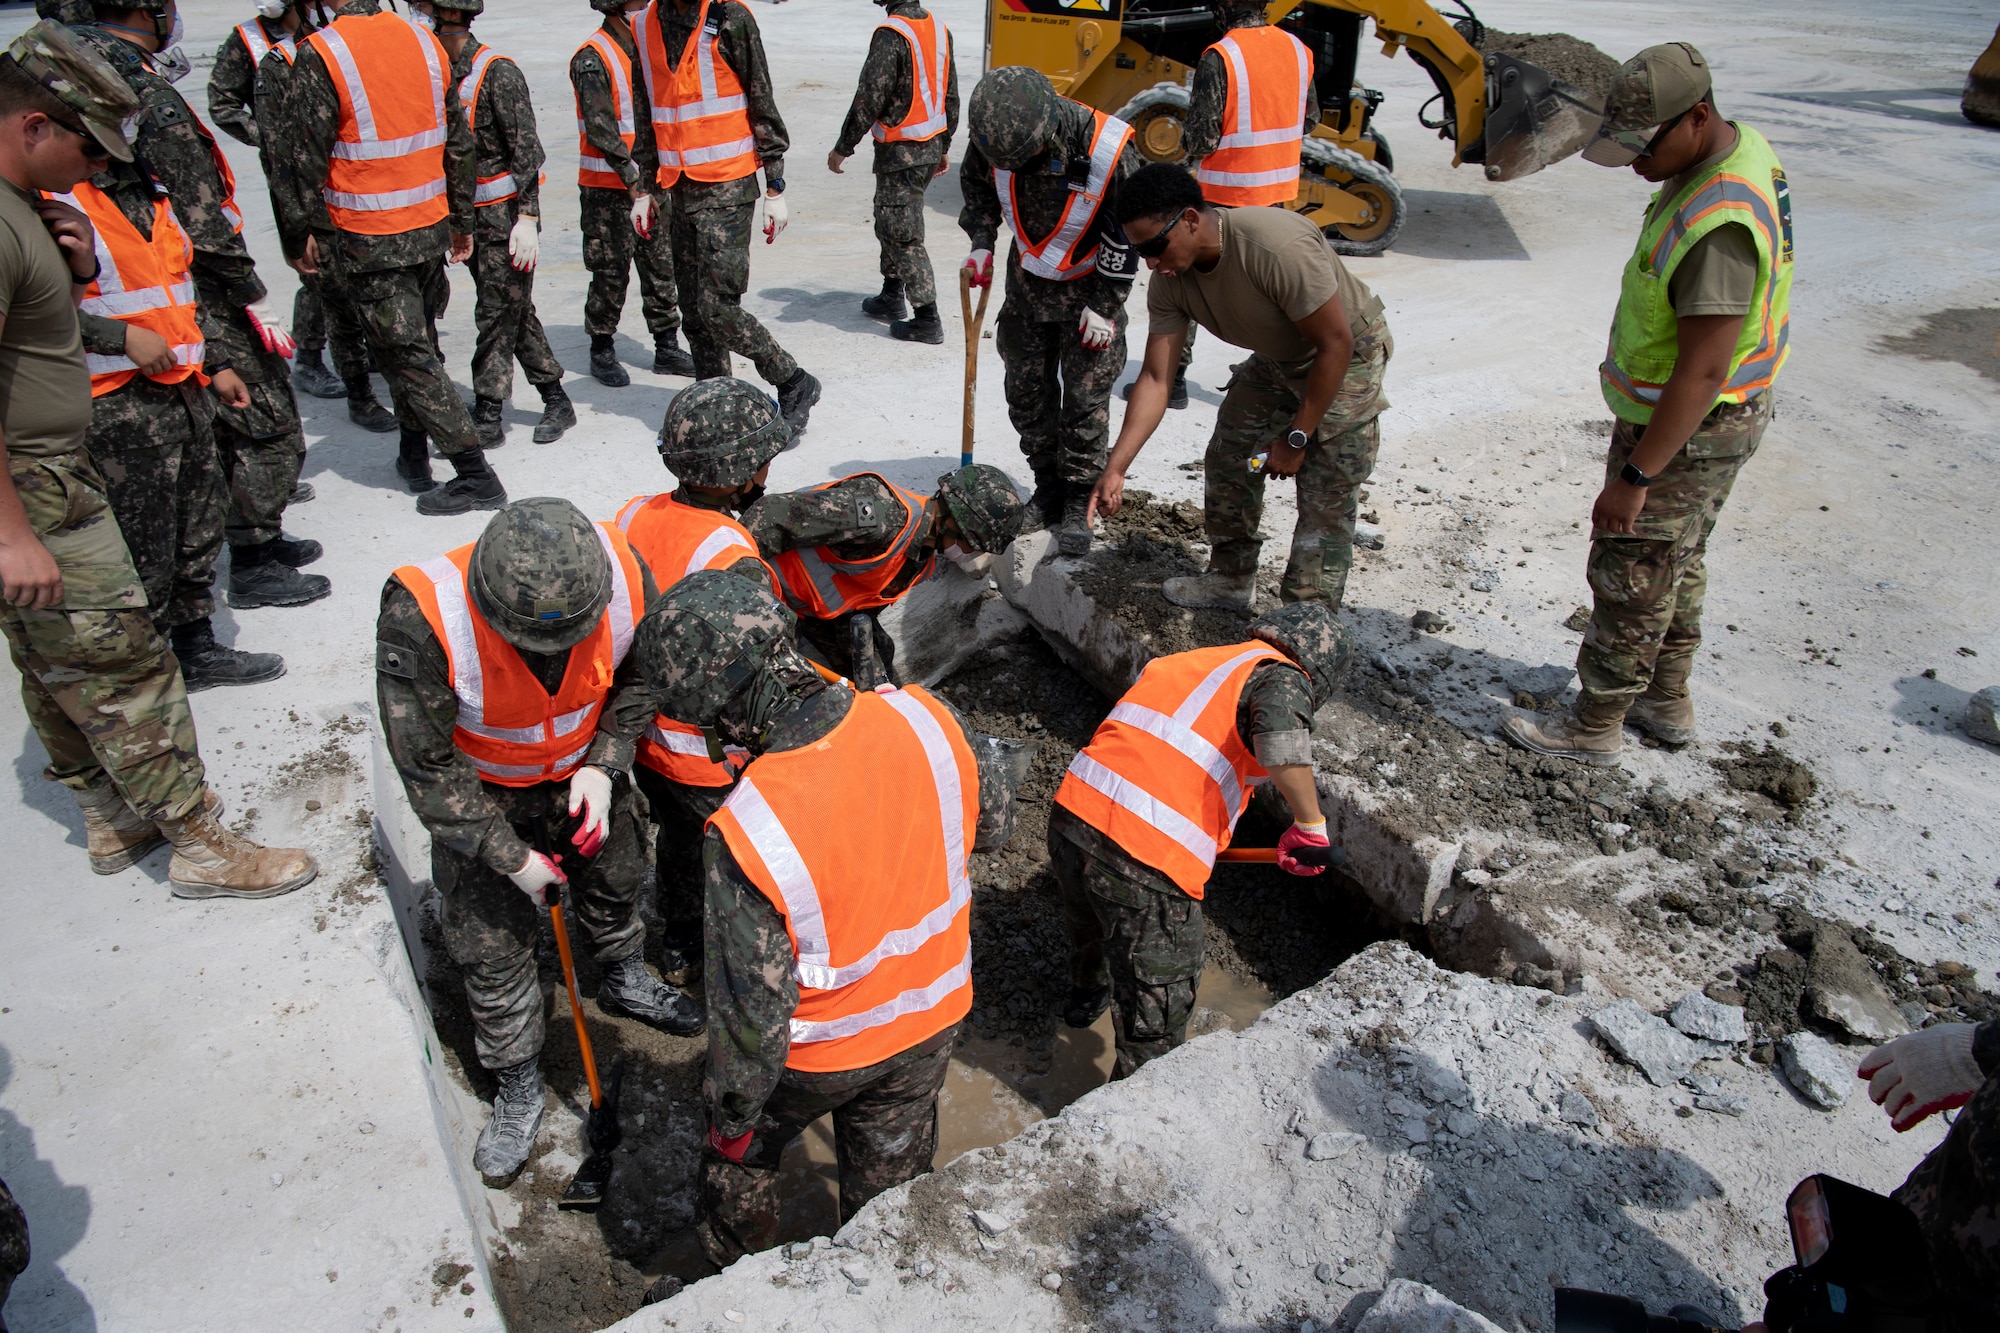 Civil engineers from the Republic of Korea and U.S. Air Force (USAF) clear debris from a hole in a cement training pad during a rapid airfield damage repair training, July 19, 2022 at Gwangju Air Base, Republic of Korea.